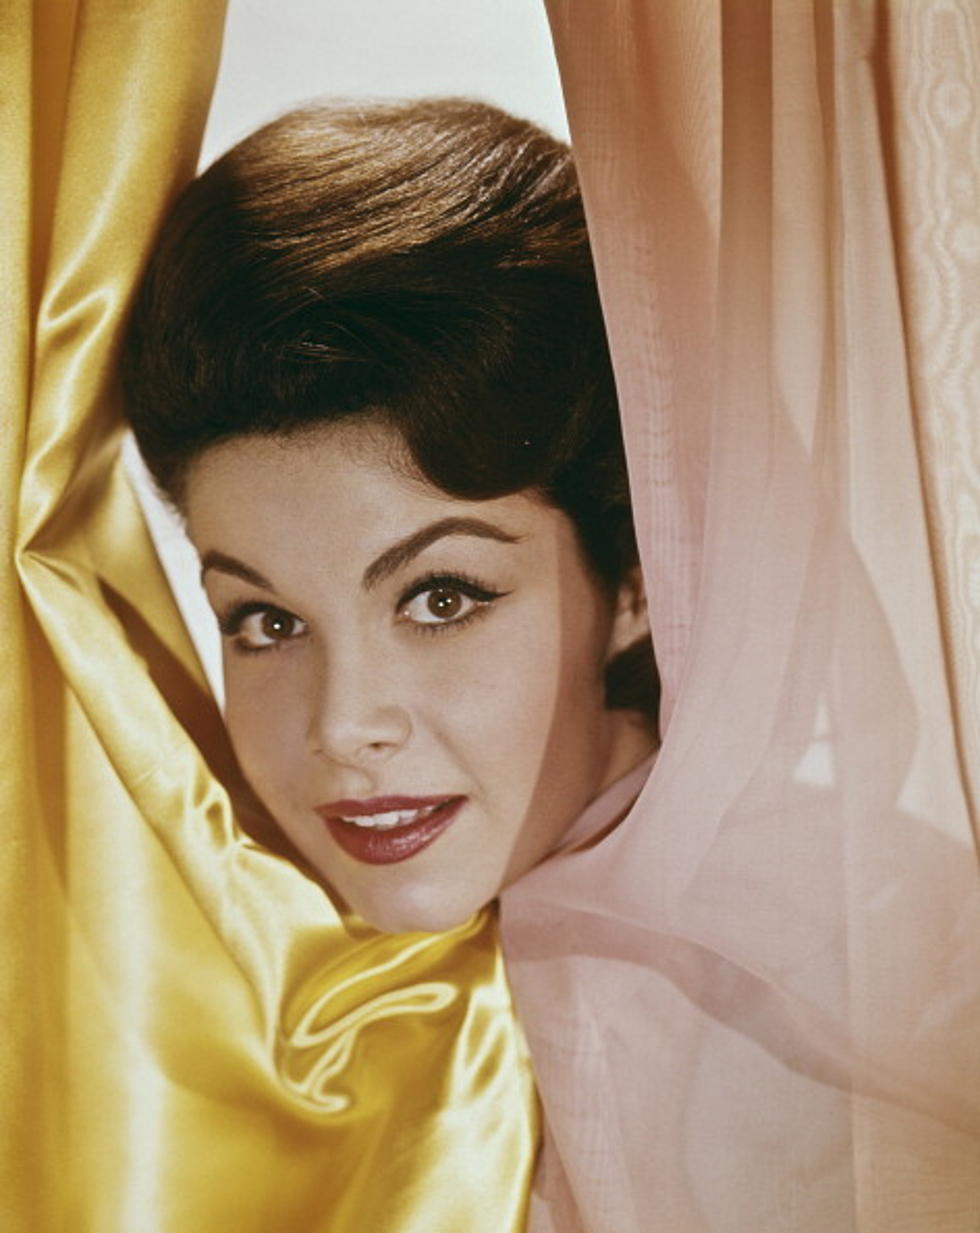 Disney Mouseketeer Annette Funicello Dead at 70